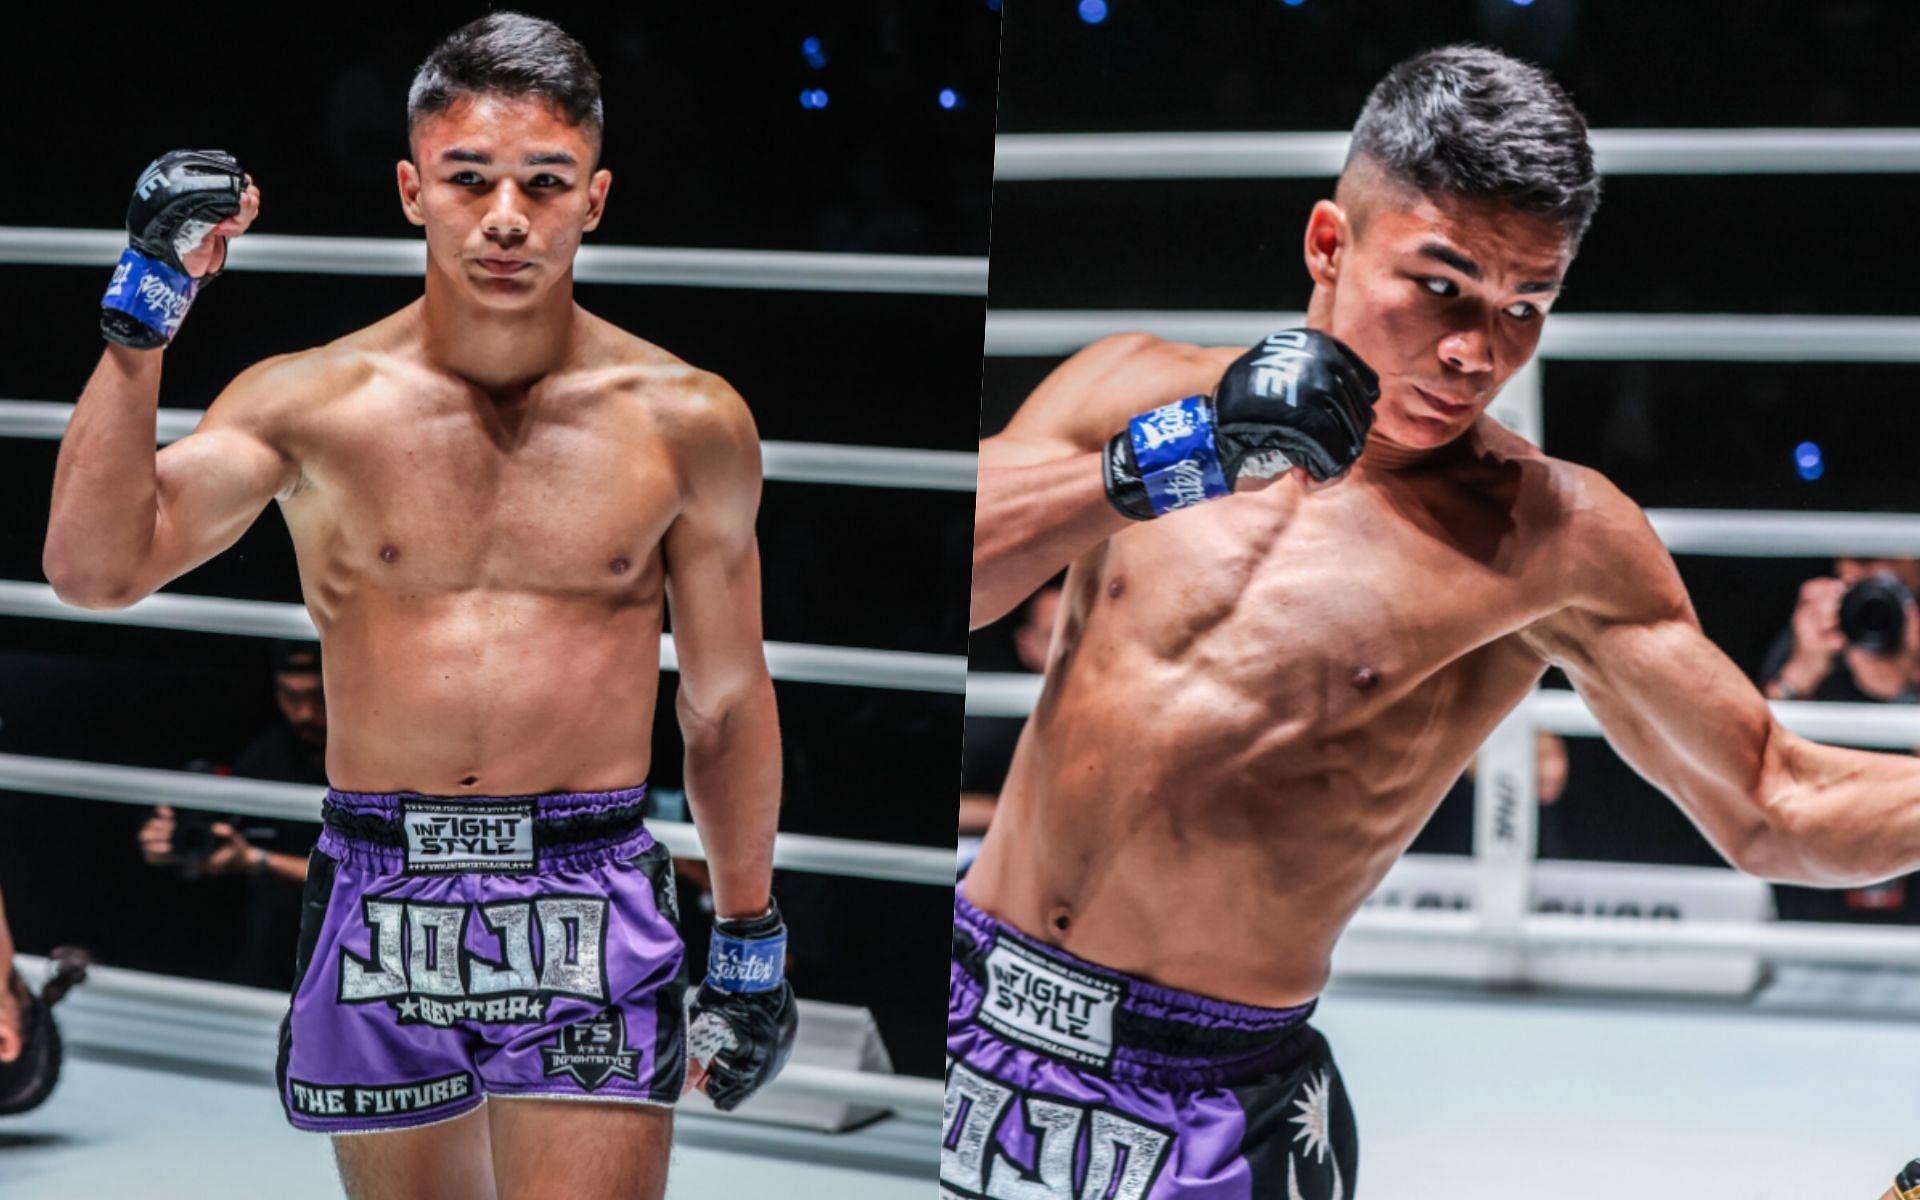 Muay Thai phenom Johan Ghazali missed out on a $50,000 performance bonus in his last fight after missing weight. -- Photo by ONE Championship